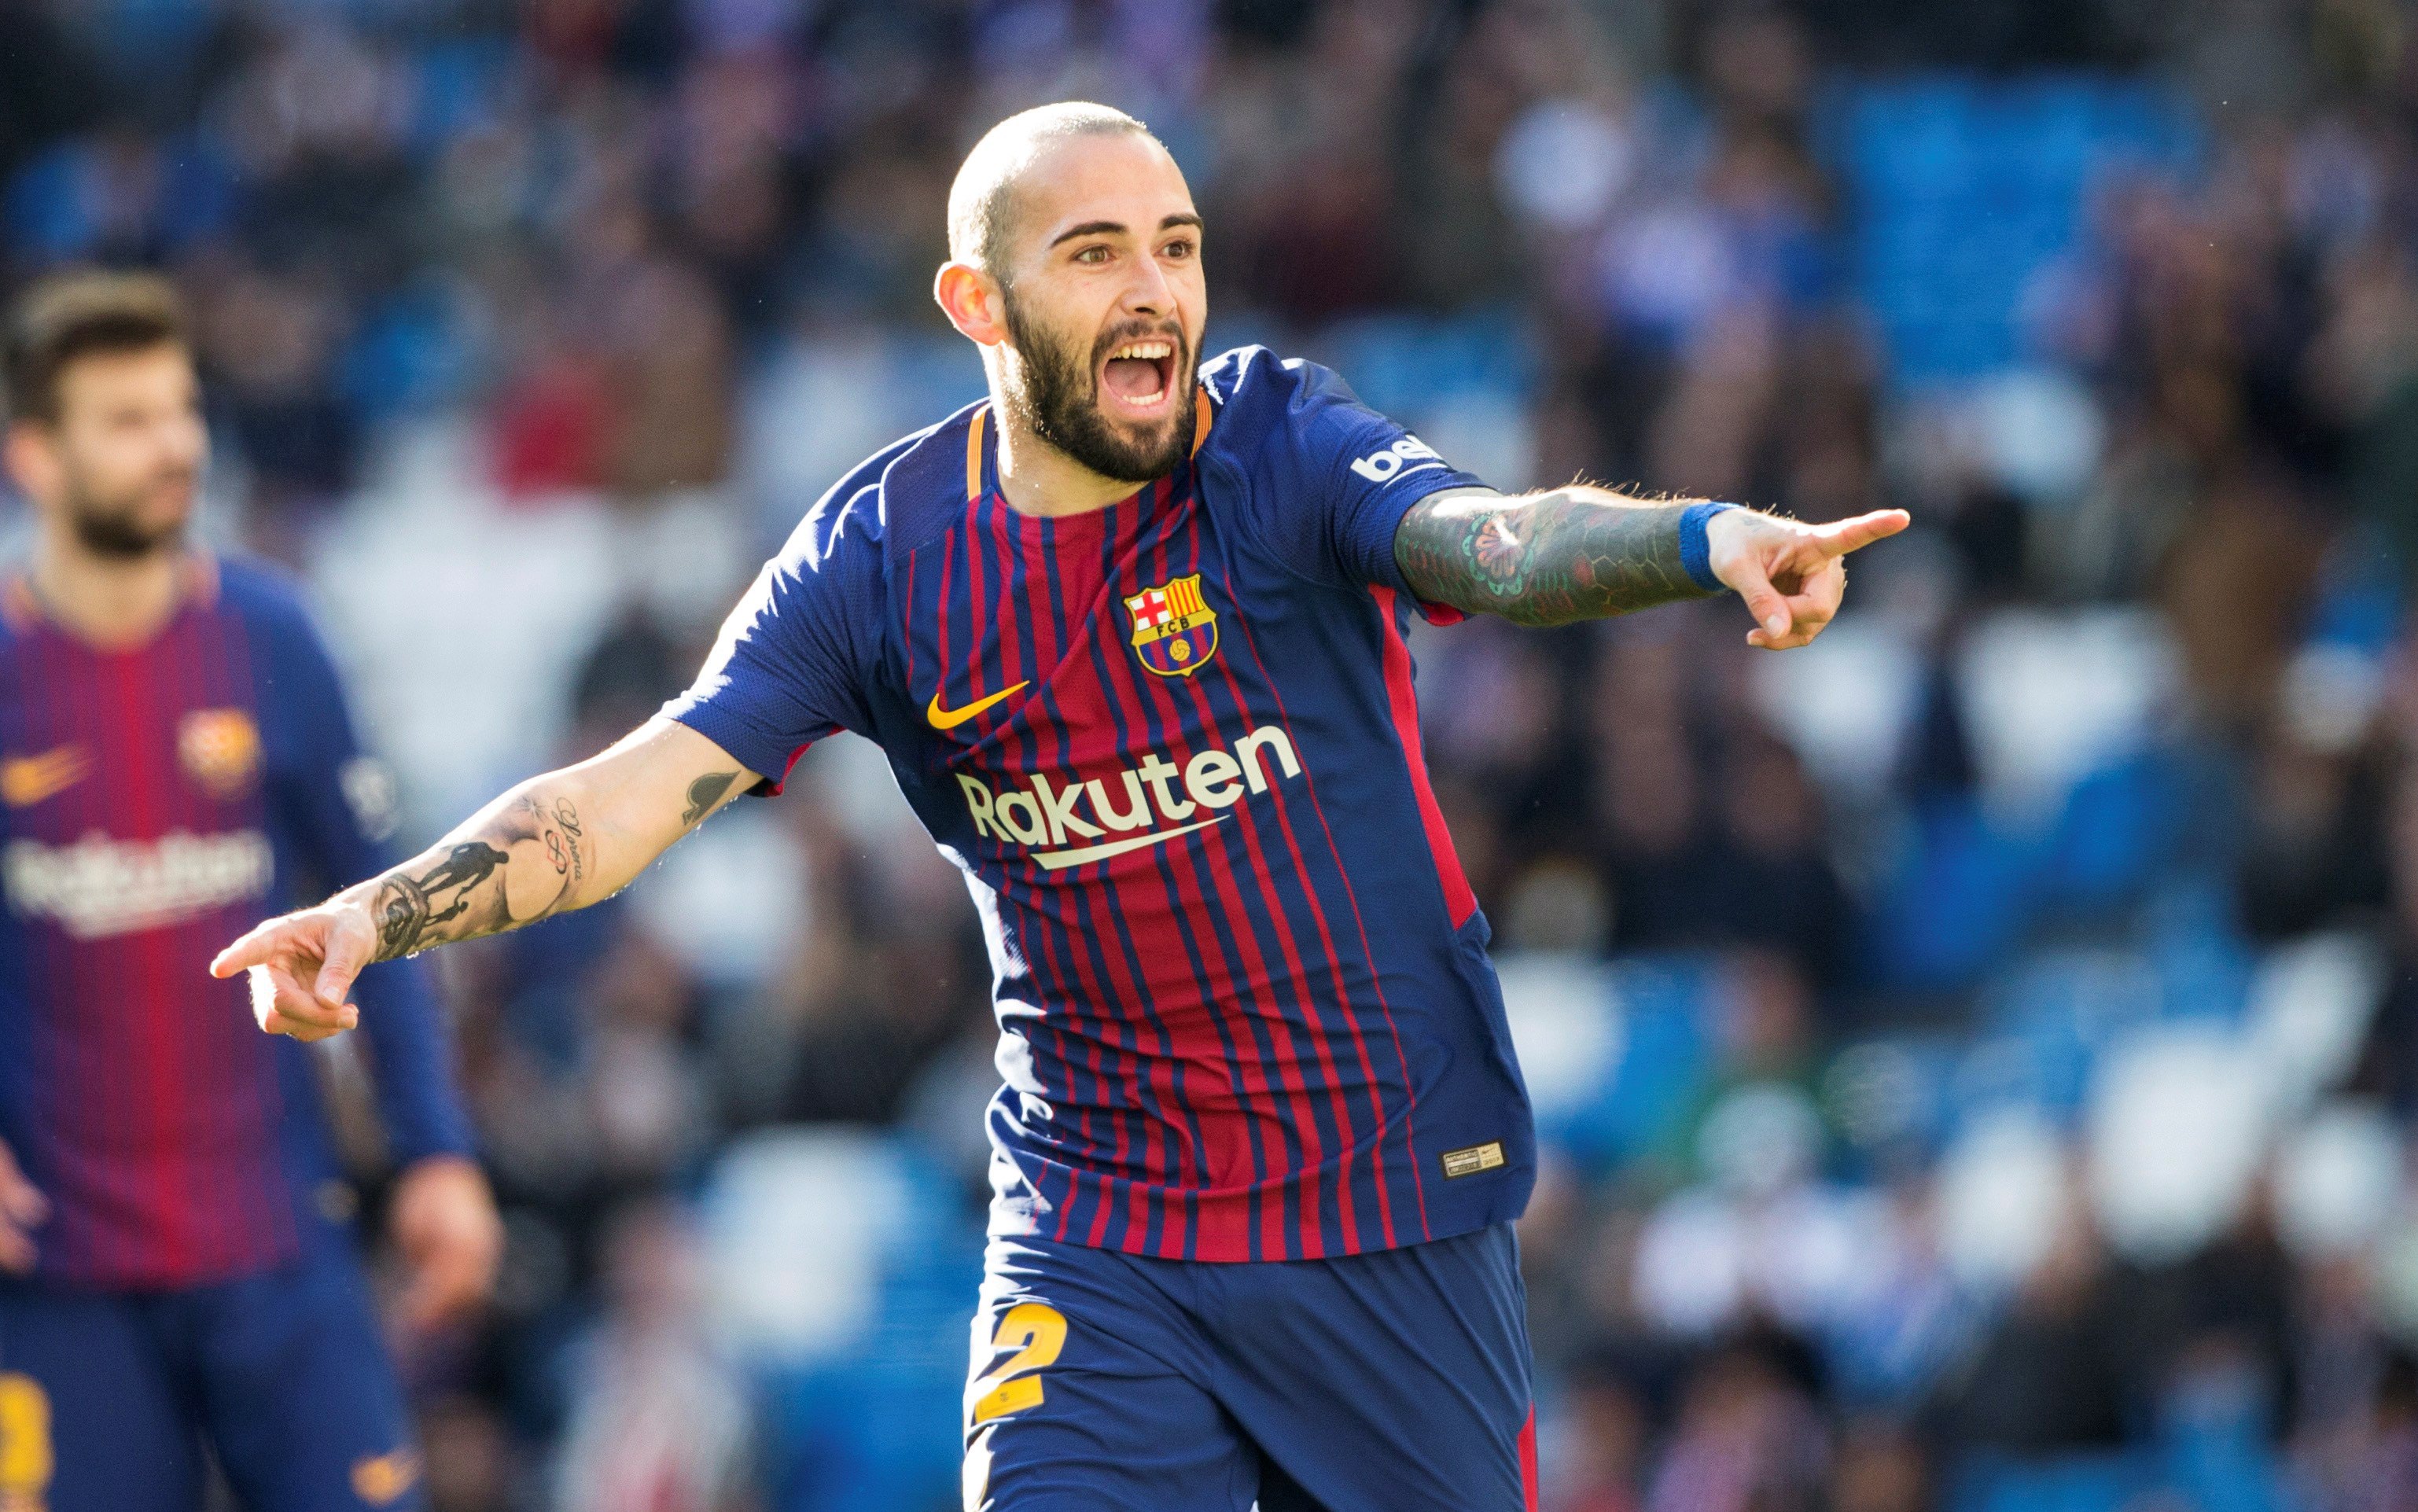 Lorena was reportedly married to Barcelona star Aleix Vidal